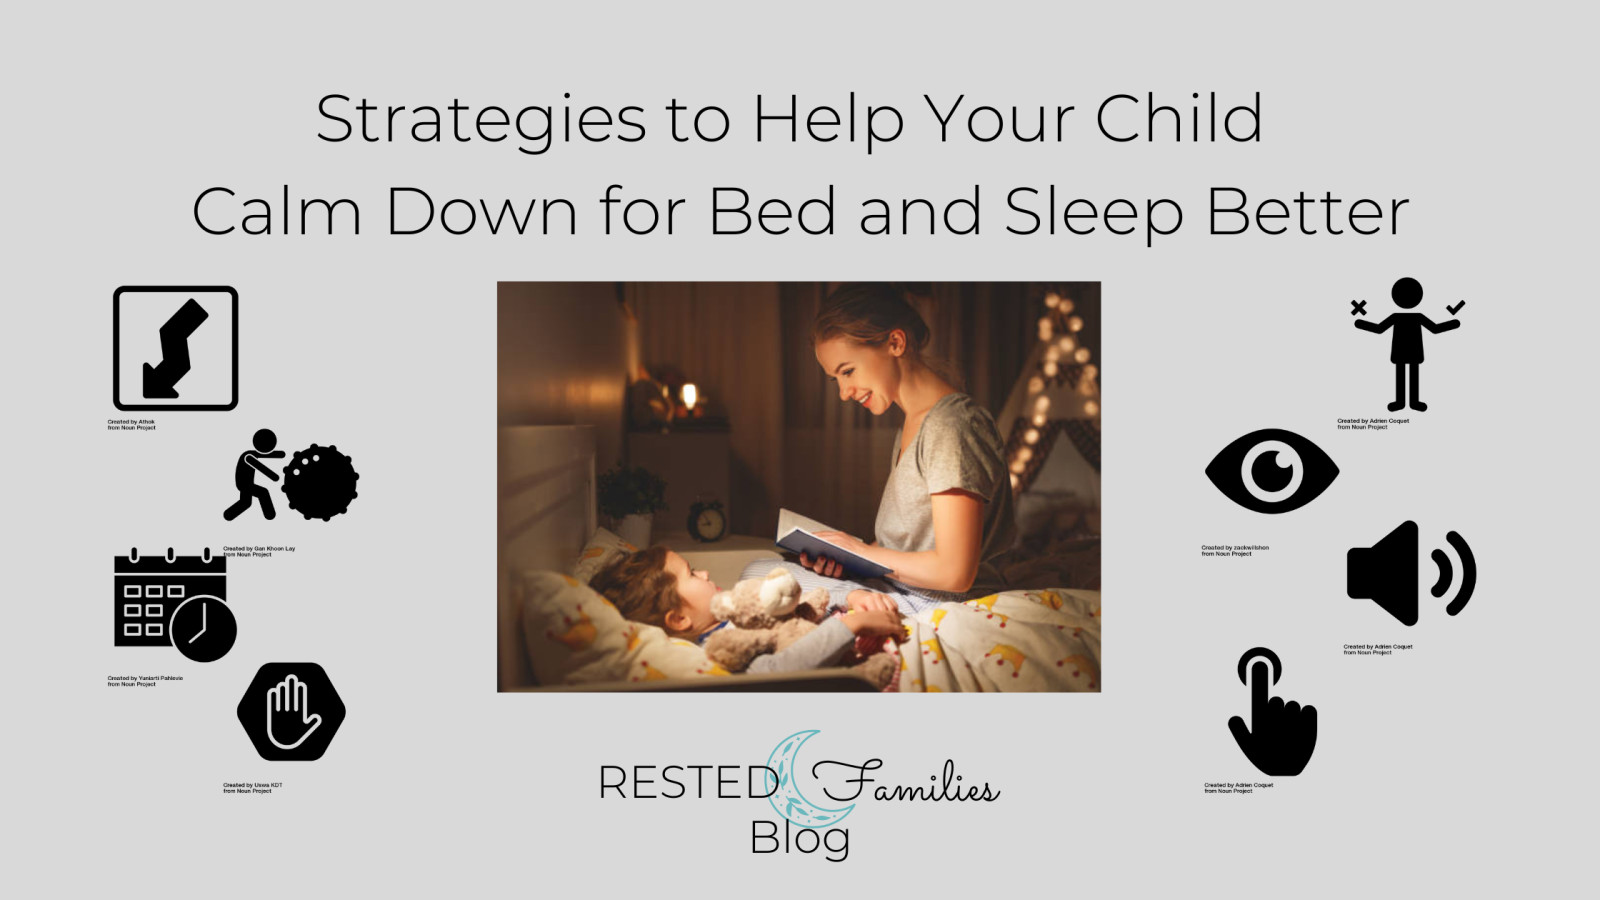 Strategies to Help Your Child Calm Down For Bed and Sleep Better